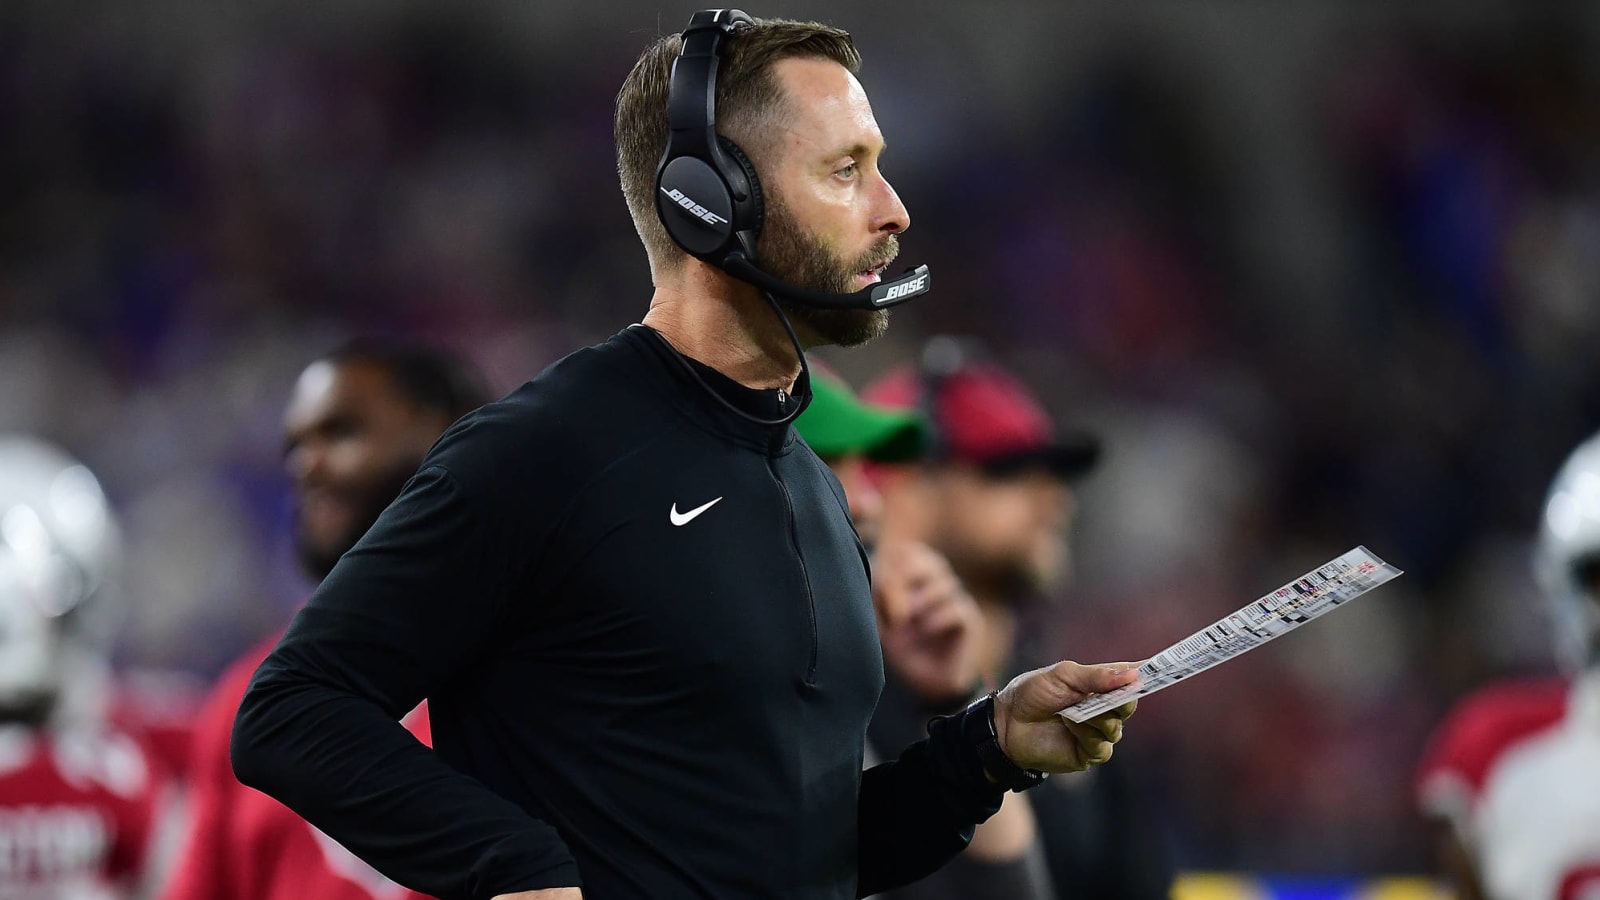 Kliff Kingsbury shares odd theory for Cardinals’ playoff exit